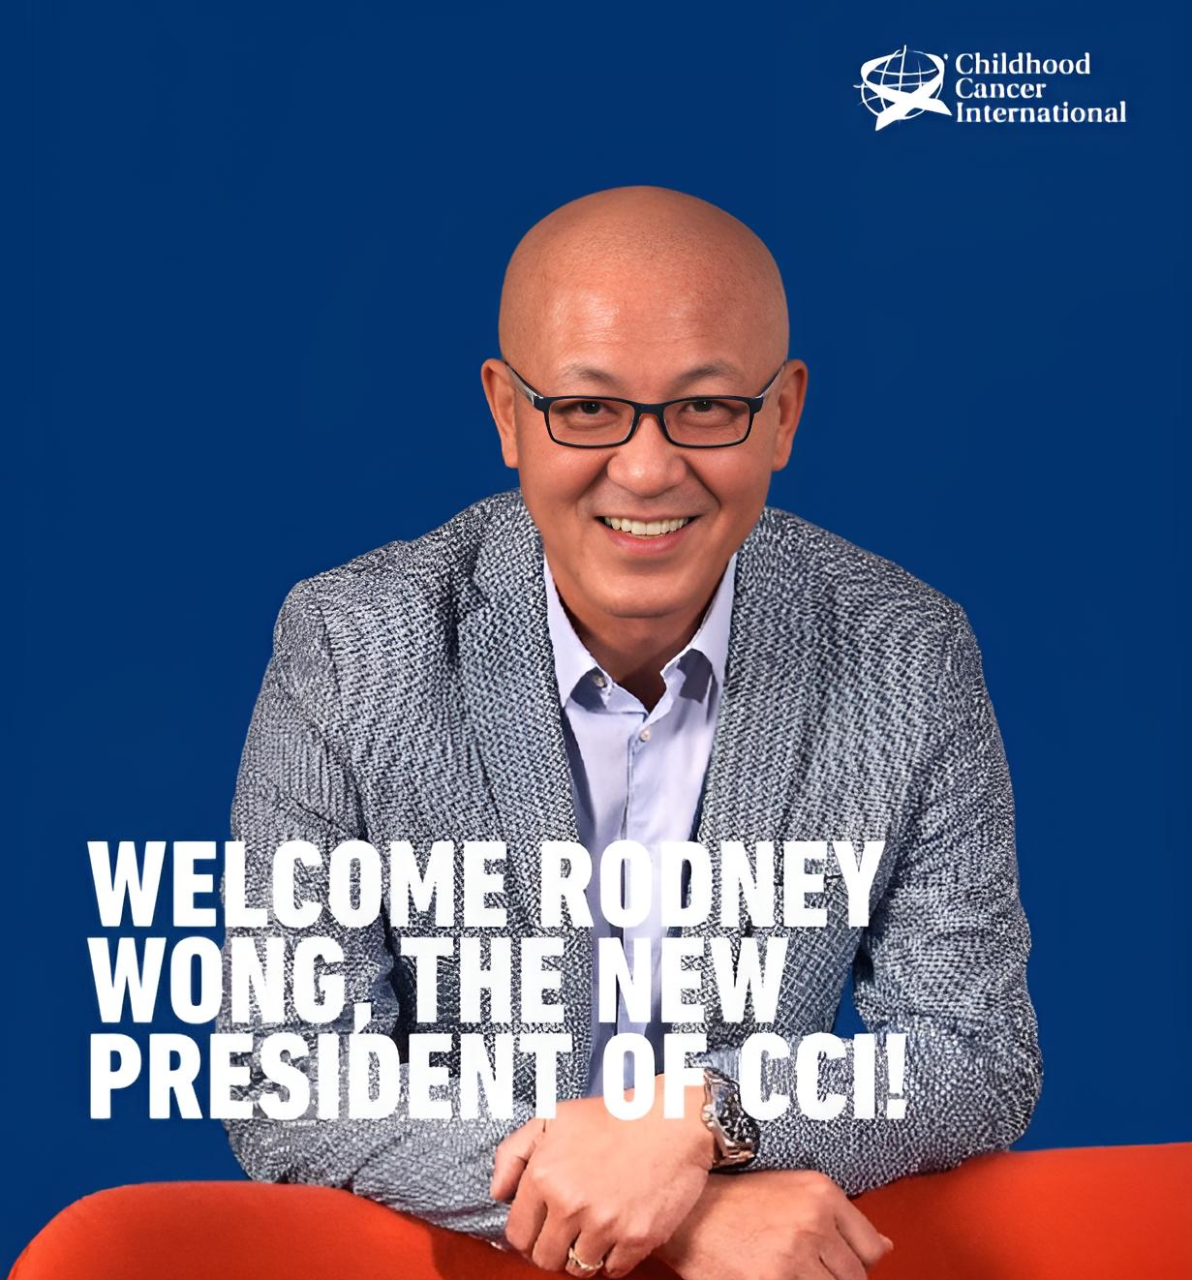 Childhood Cancer International welcomes Rodney Wong as their new CCI president